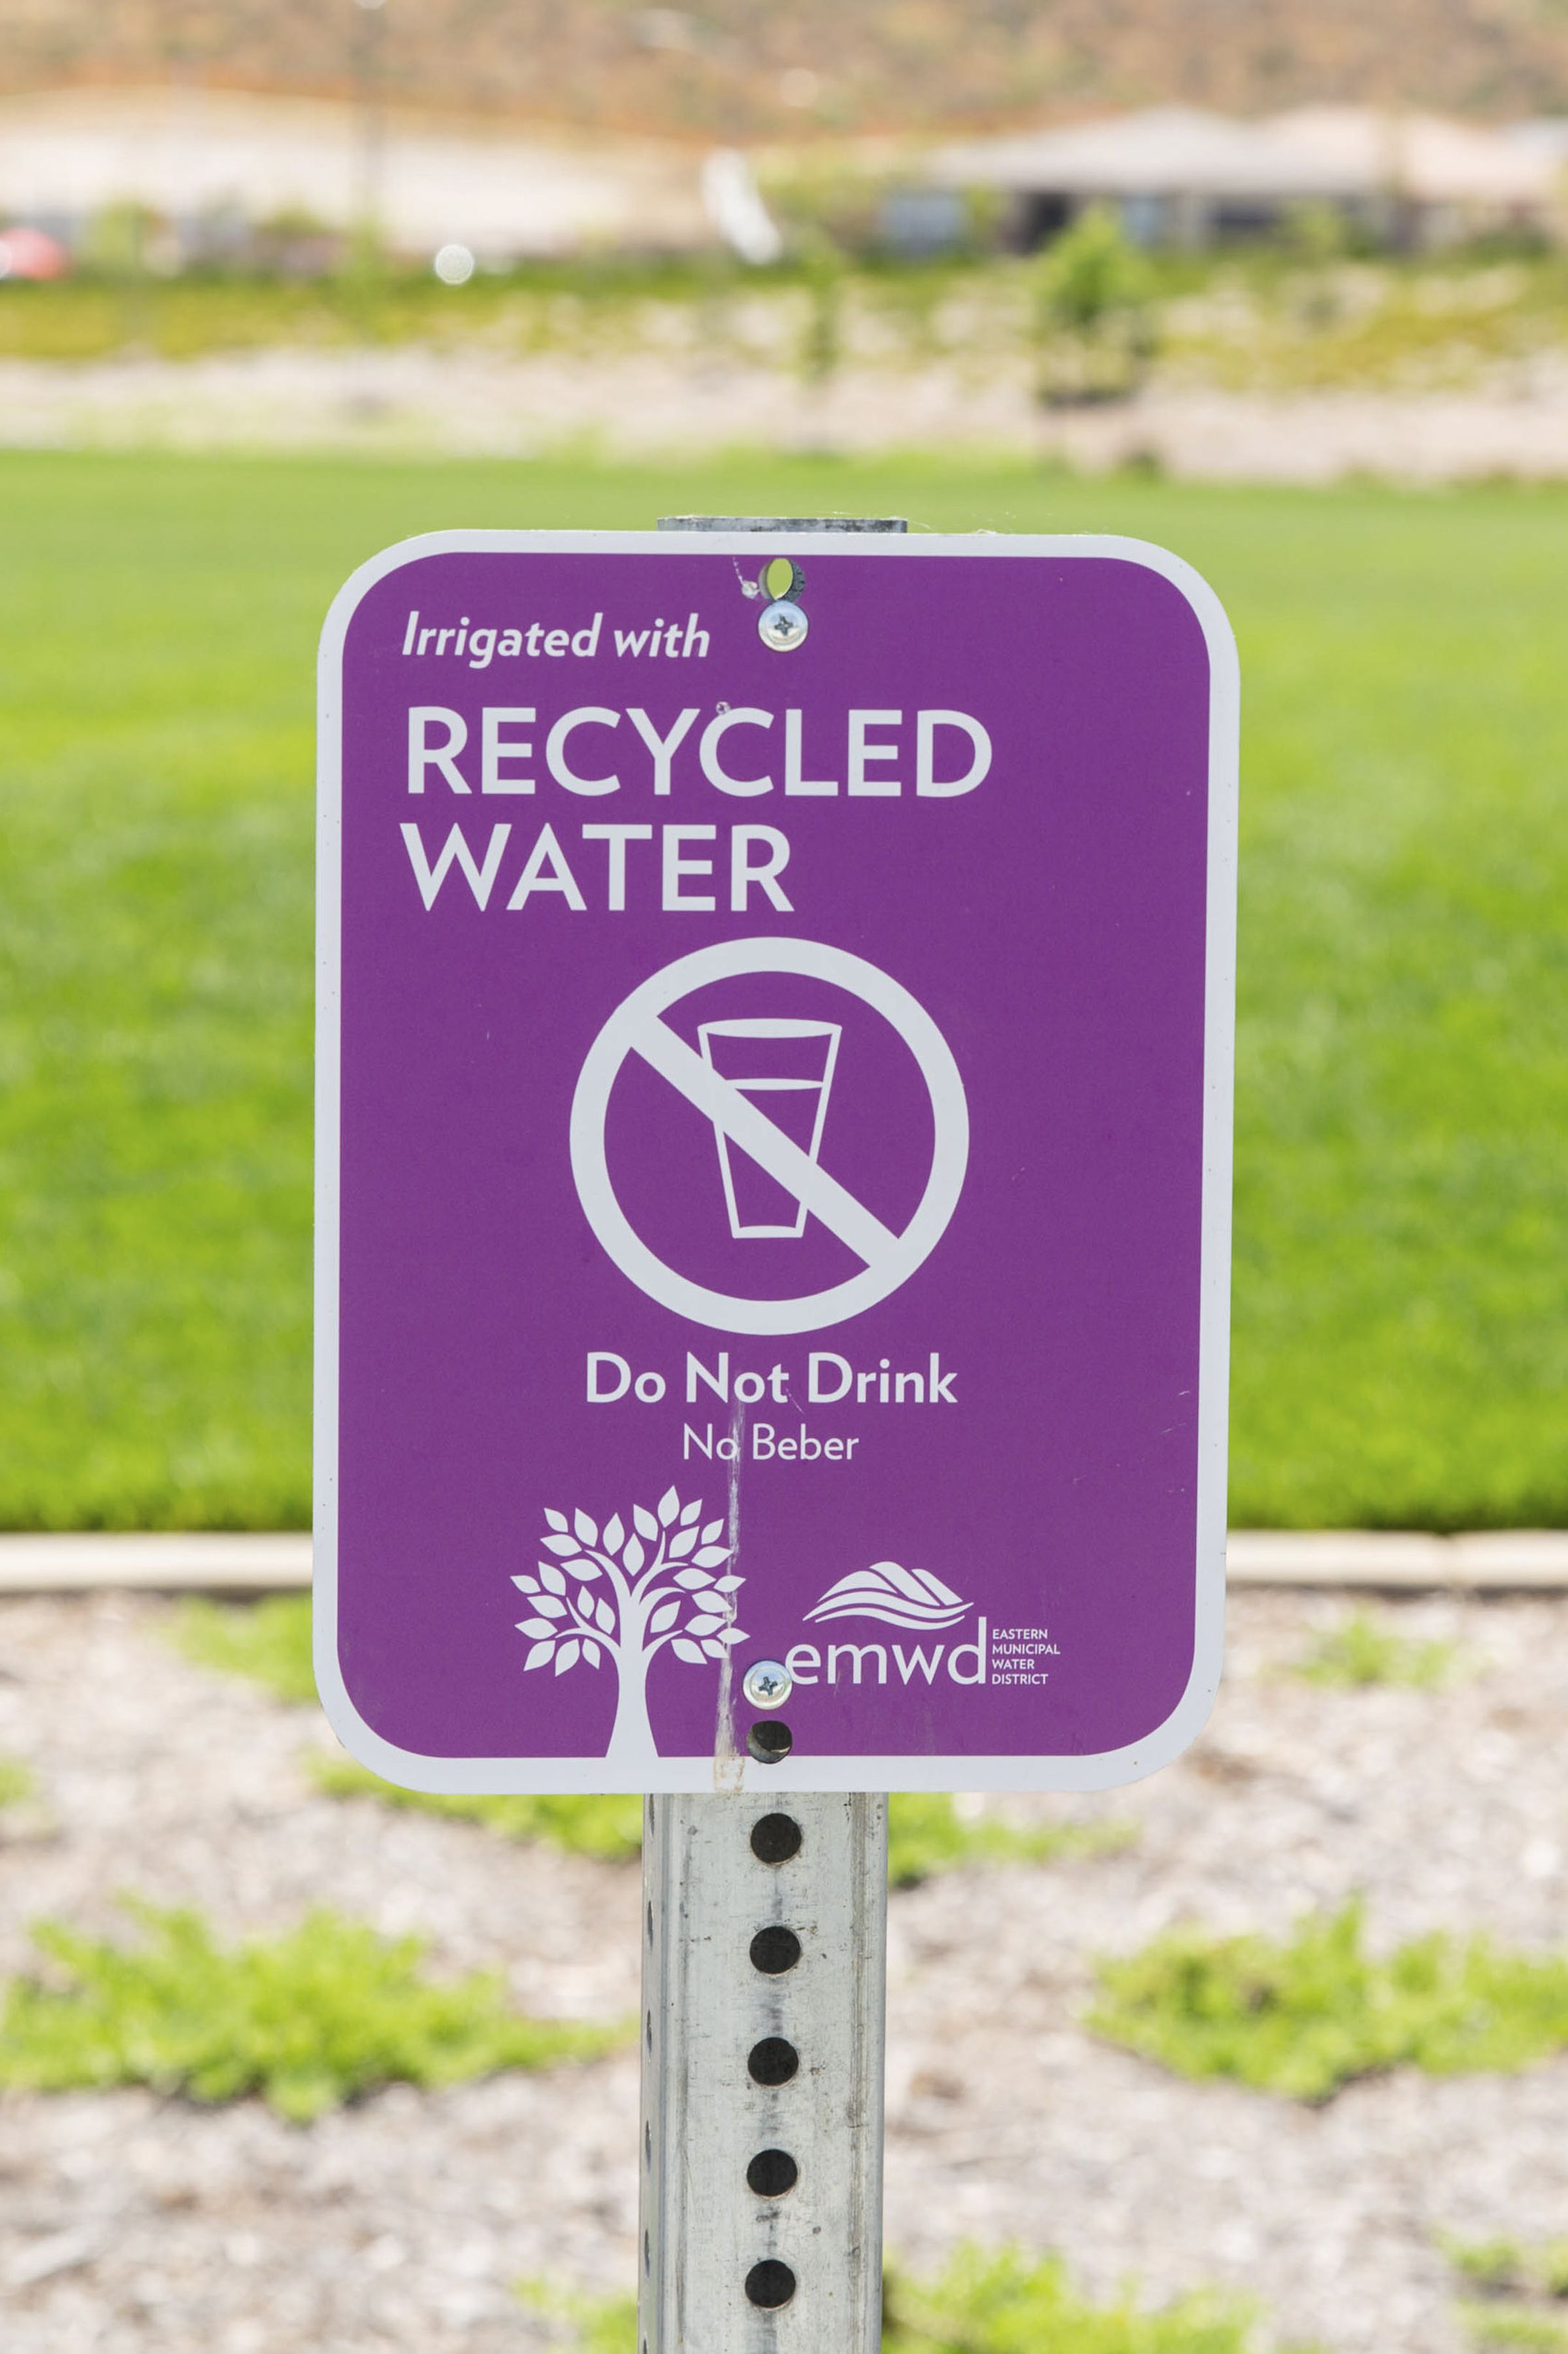 The community park is irrigated with recycled water, and the homes use smart WaterSense-labeled controllers that save water through weather monitoring.